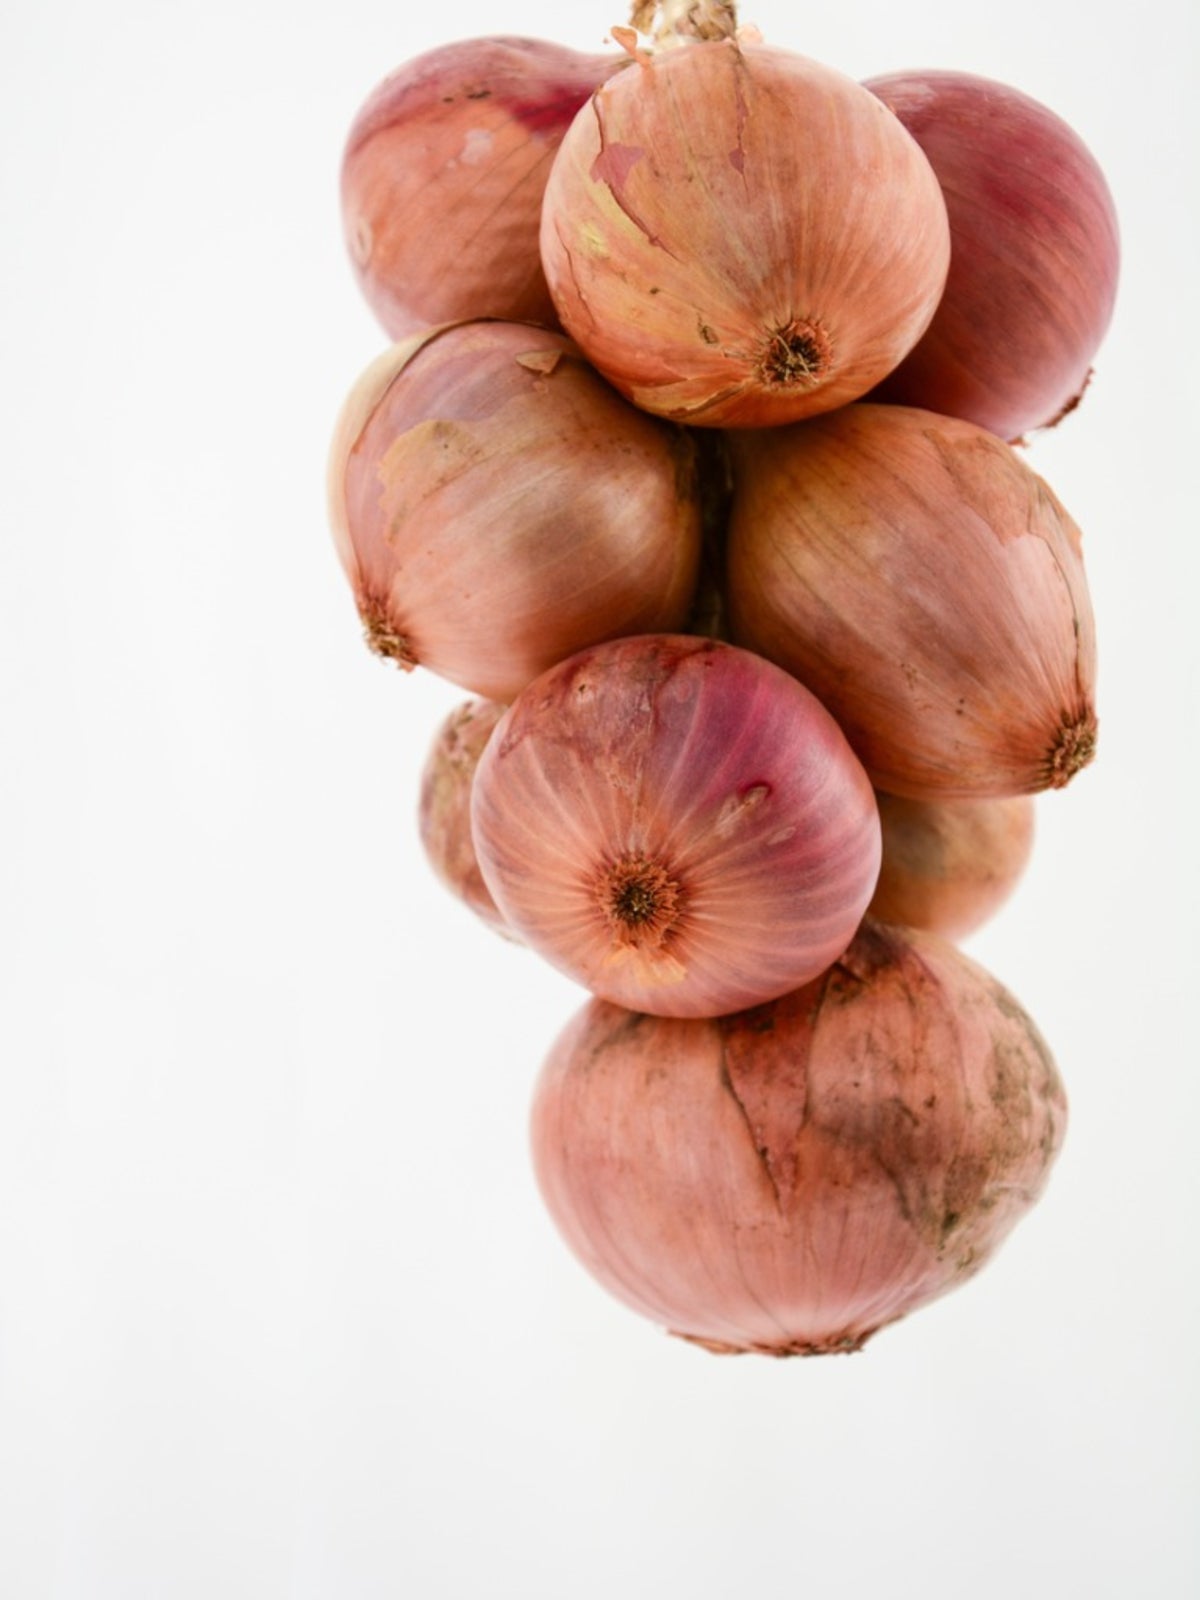 The Best Way to Store Onions